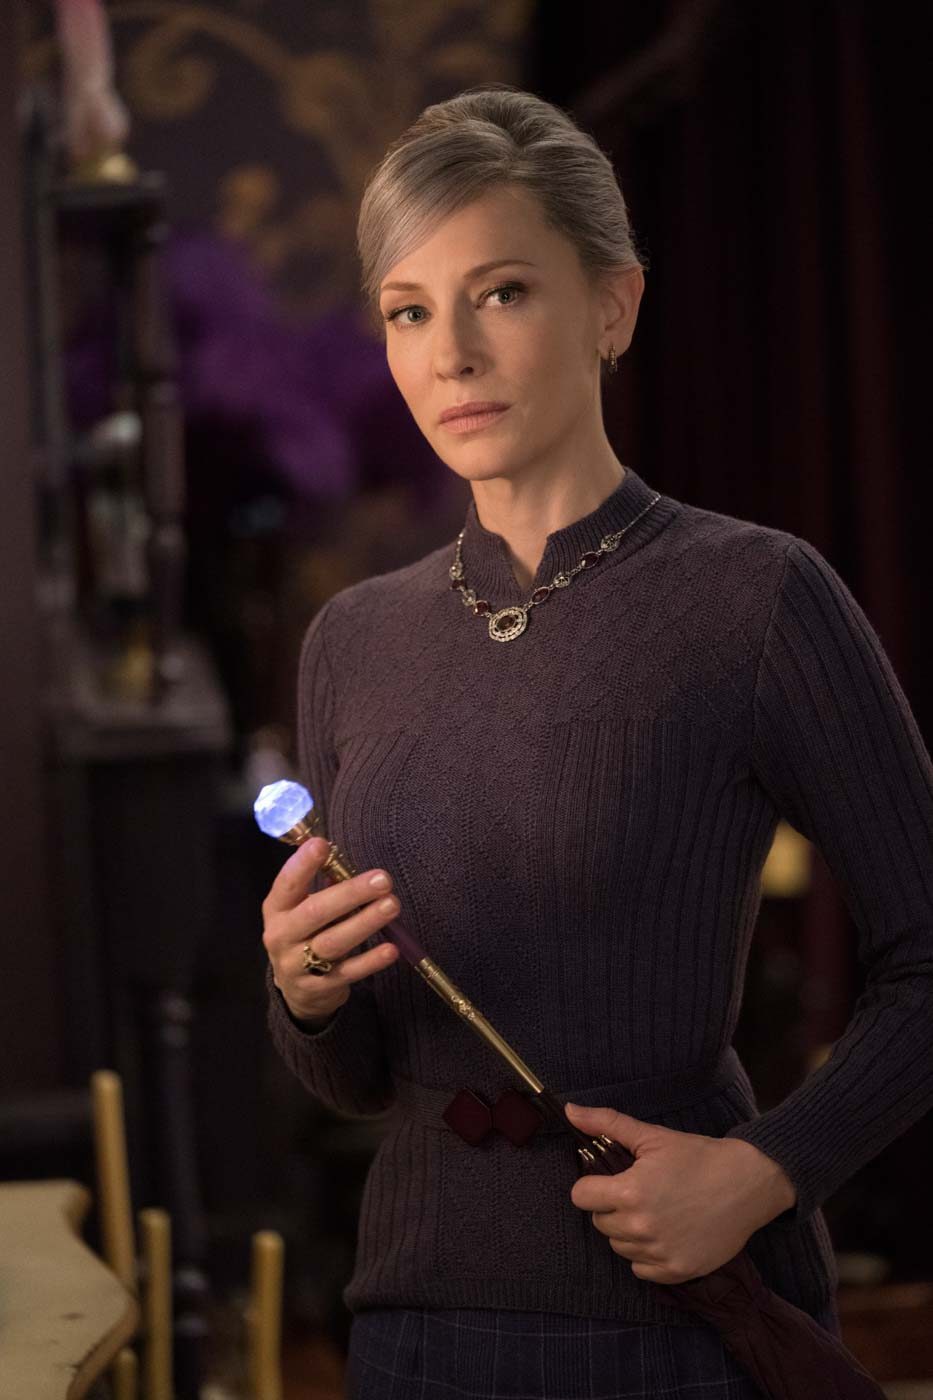 QUEEN CATE. Cate Blanchett plays Mrs. Zimmerman, a brilliant witch with a tragic past, in 'The House With A Clock in Its Walls.'  